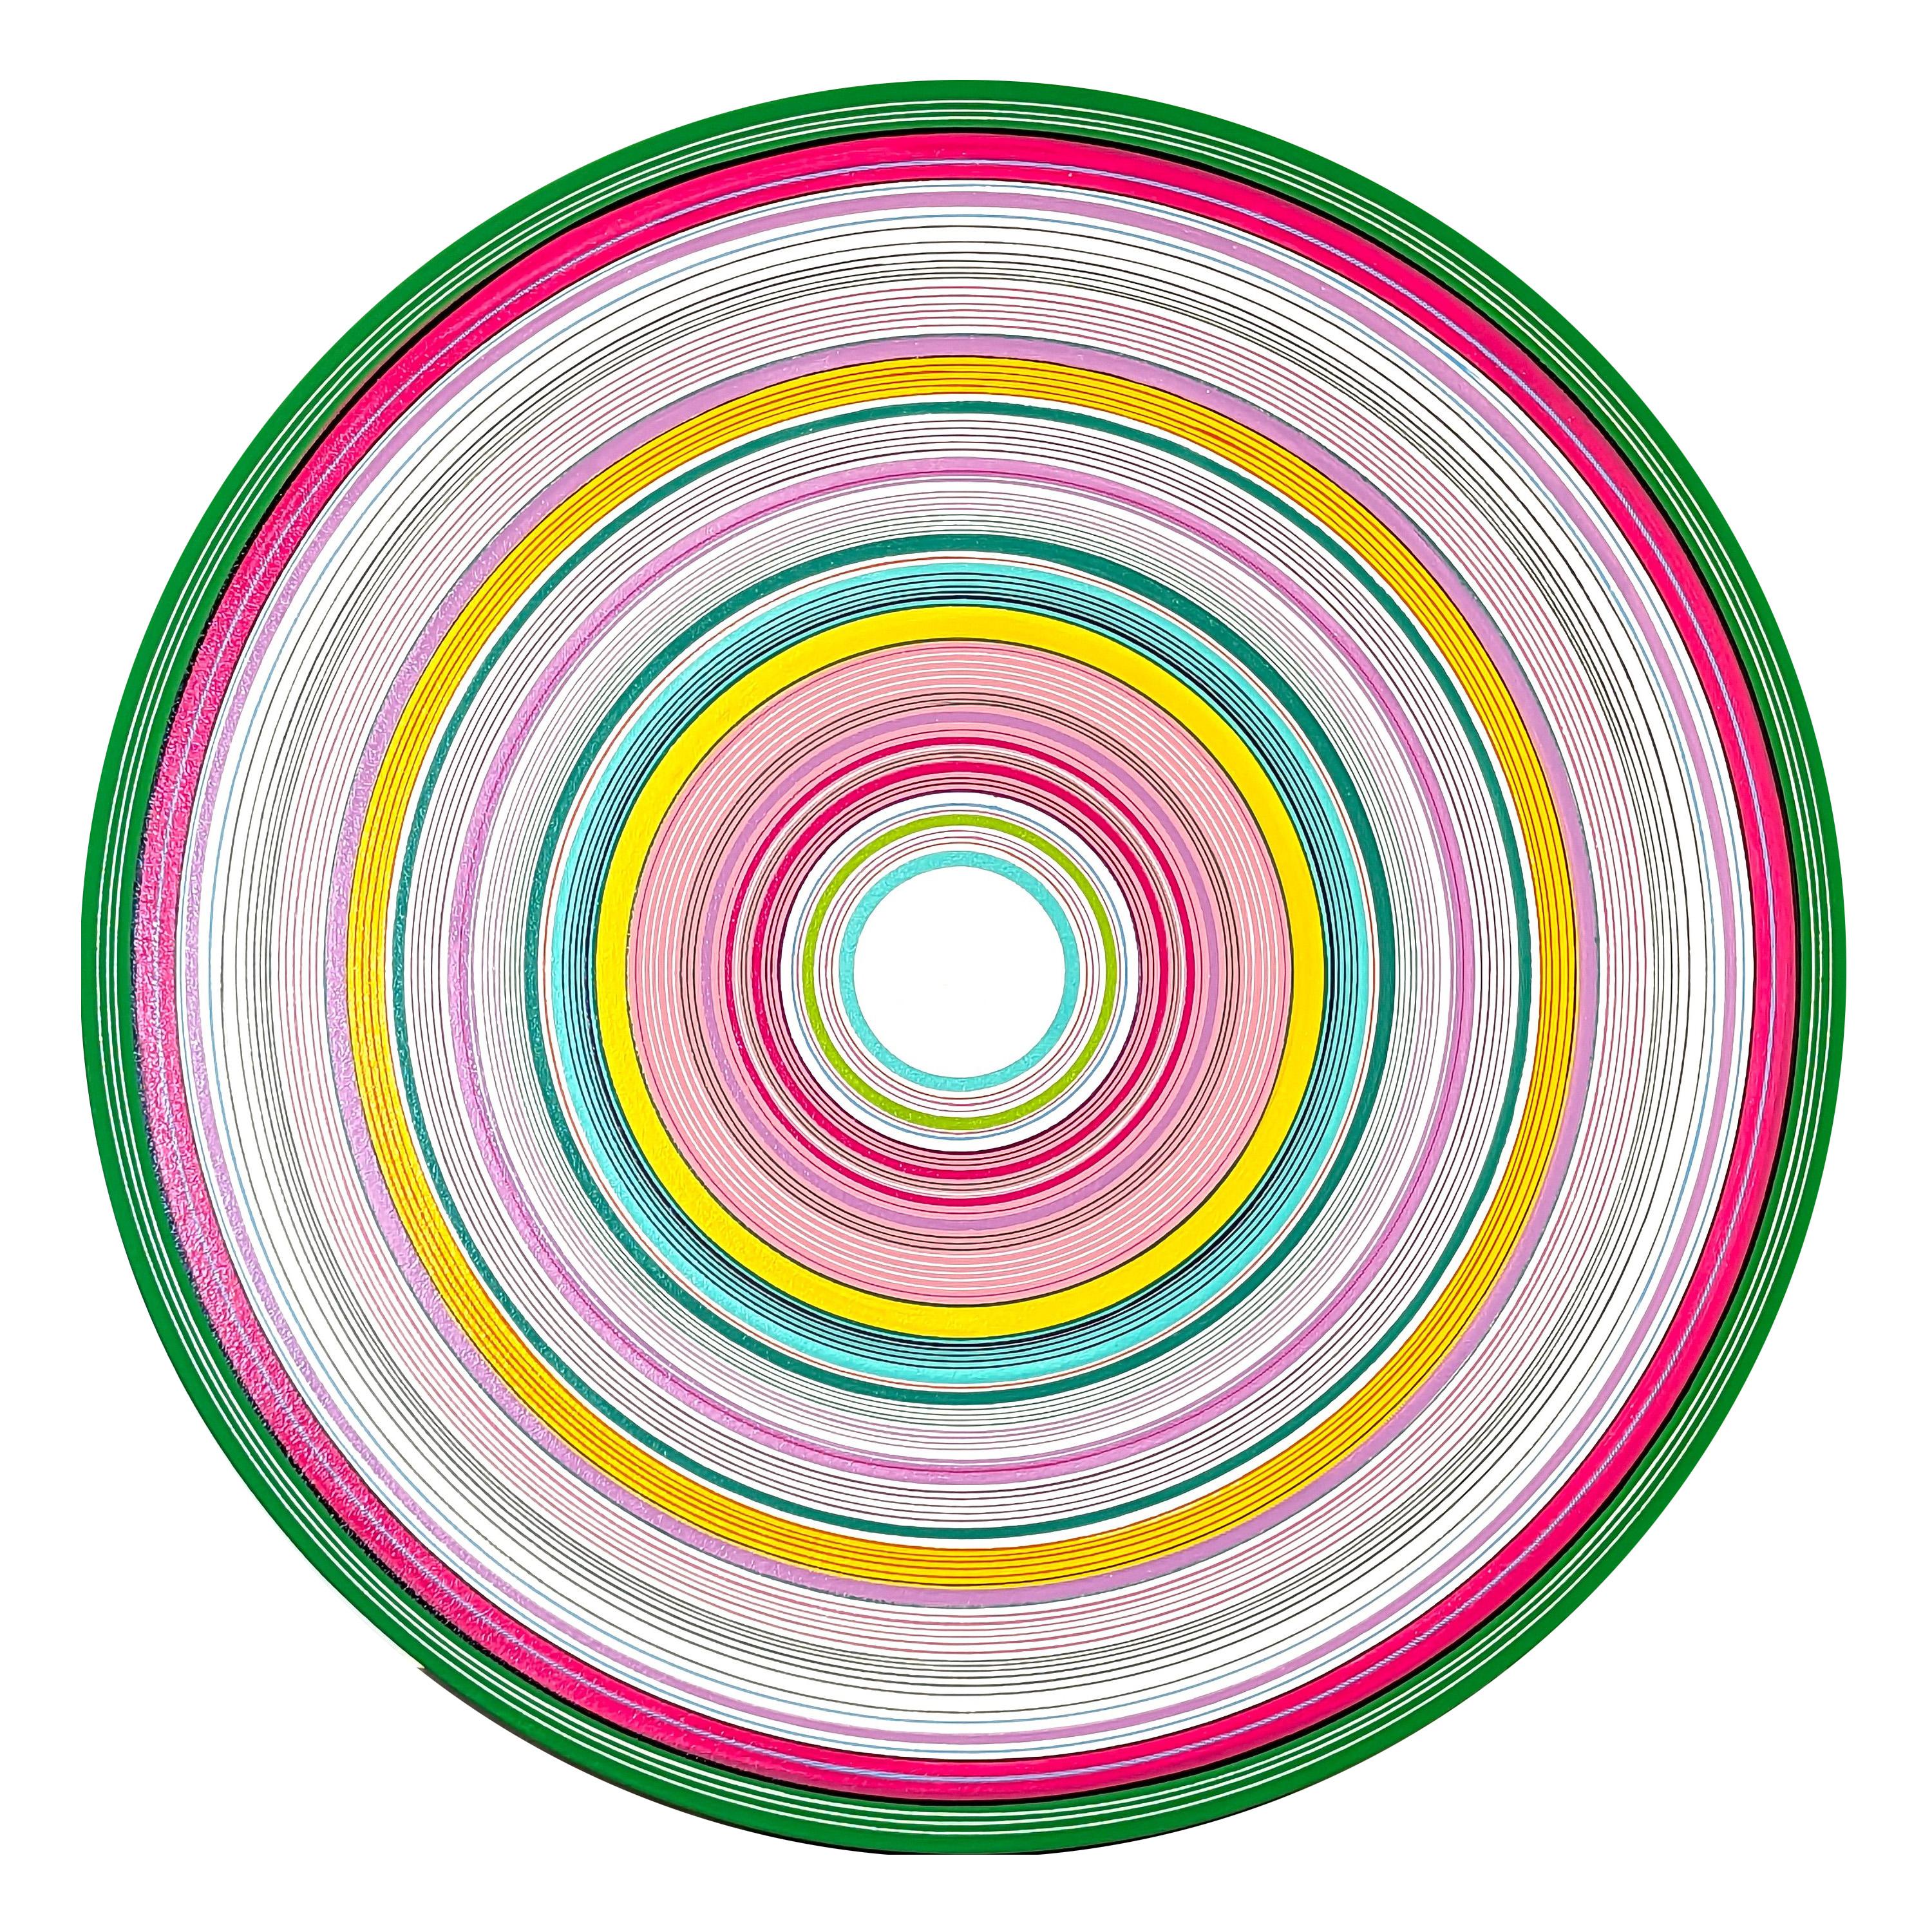 David Hardaker Abstract Painting - “OH!” Contemporary Green, Pink, and Yellow Concentric Circle Painting